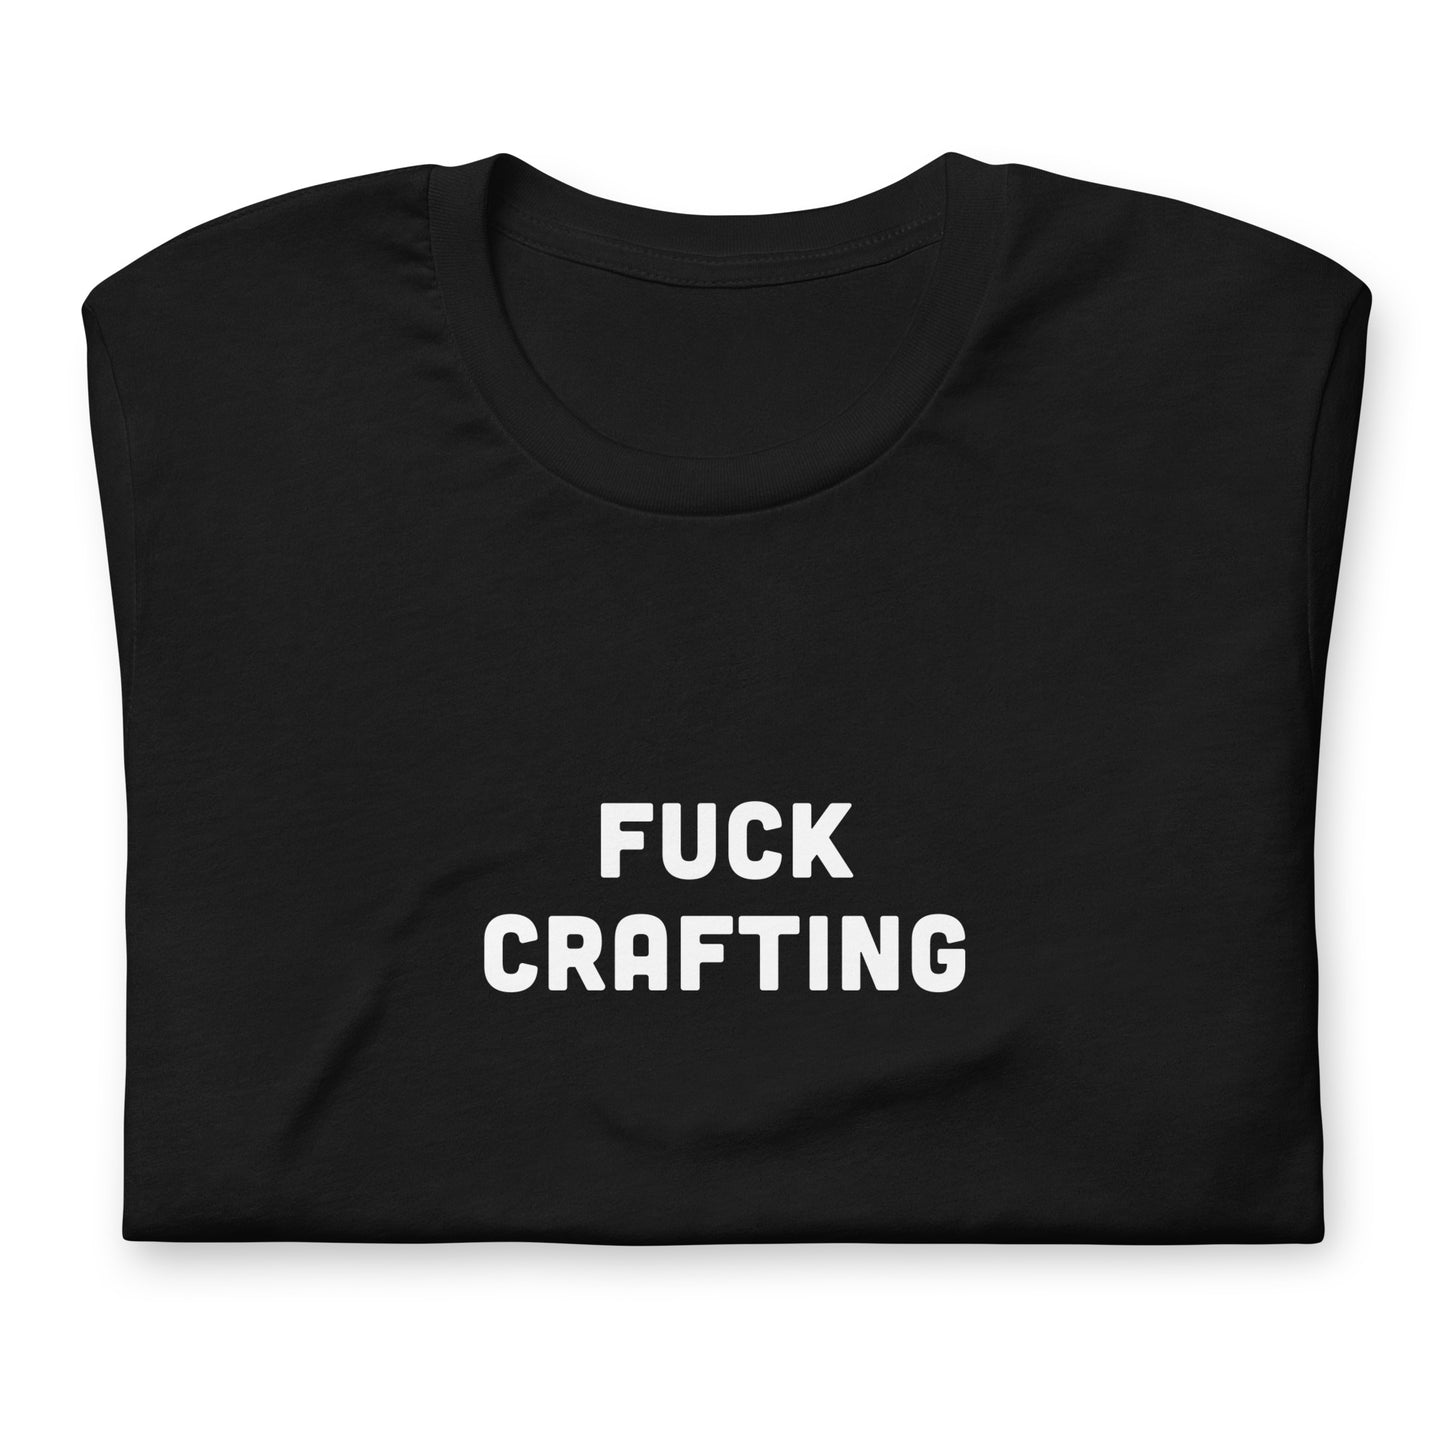 Fuck Crafting T-Shirt Size M Color Black